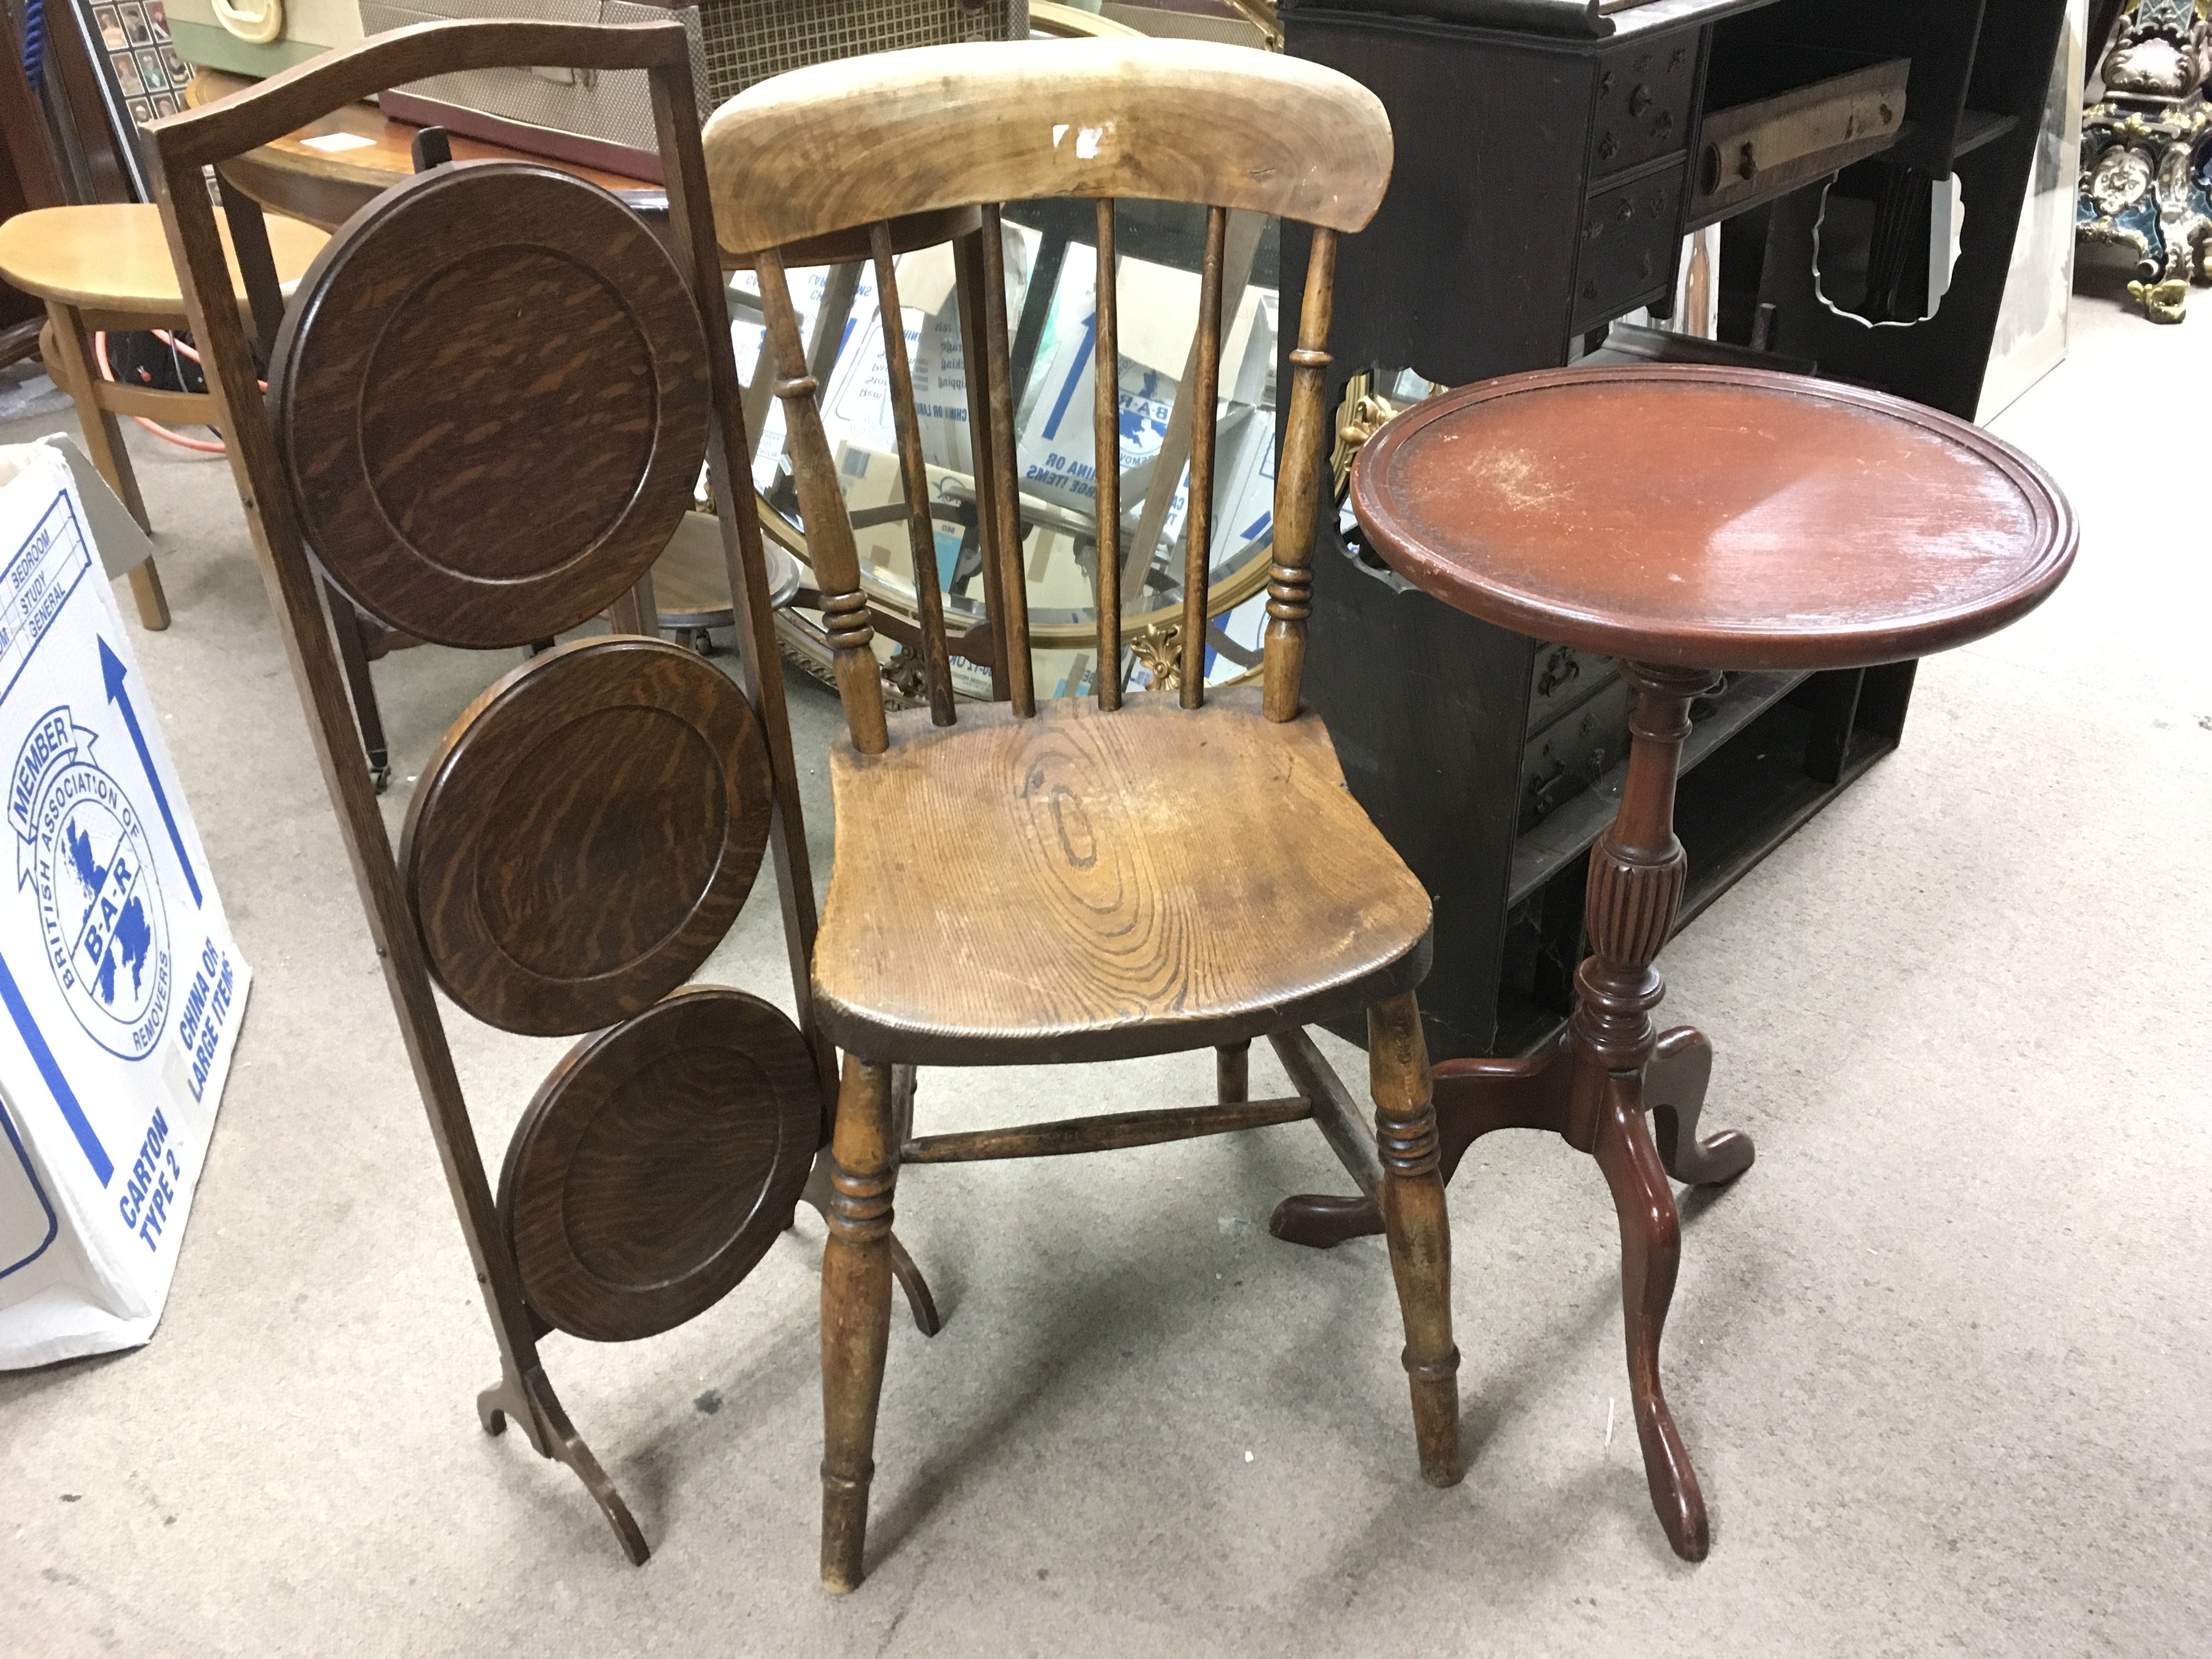 An oak chair, three tier folding stand and a circu